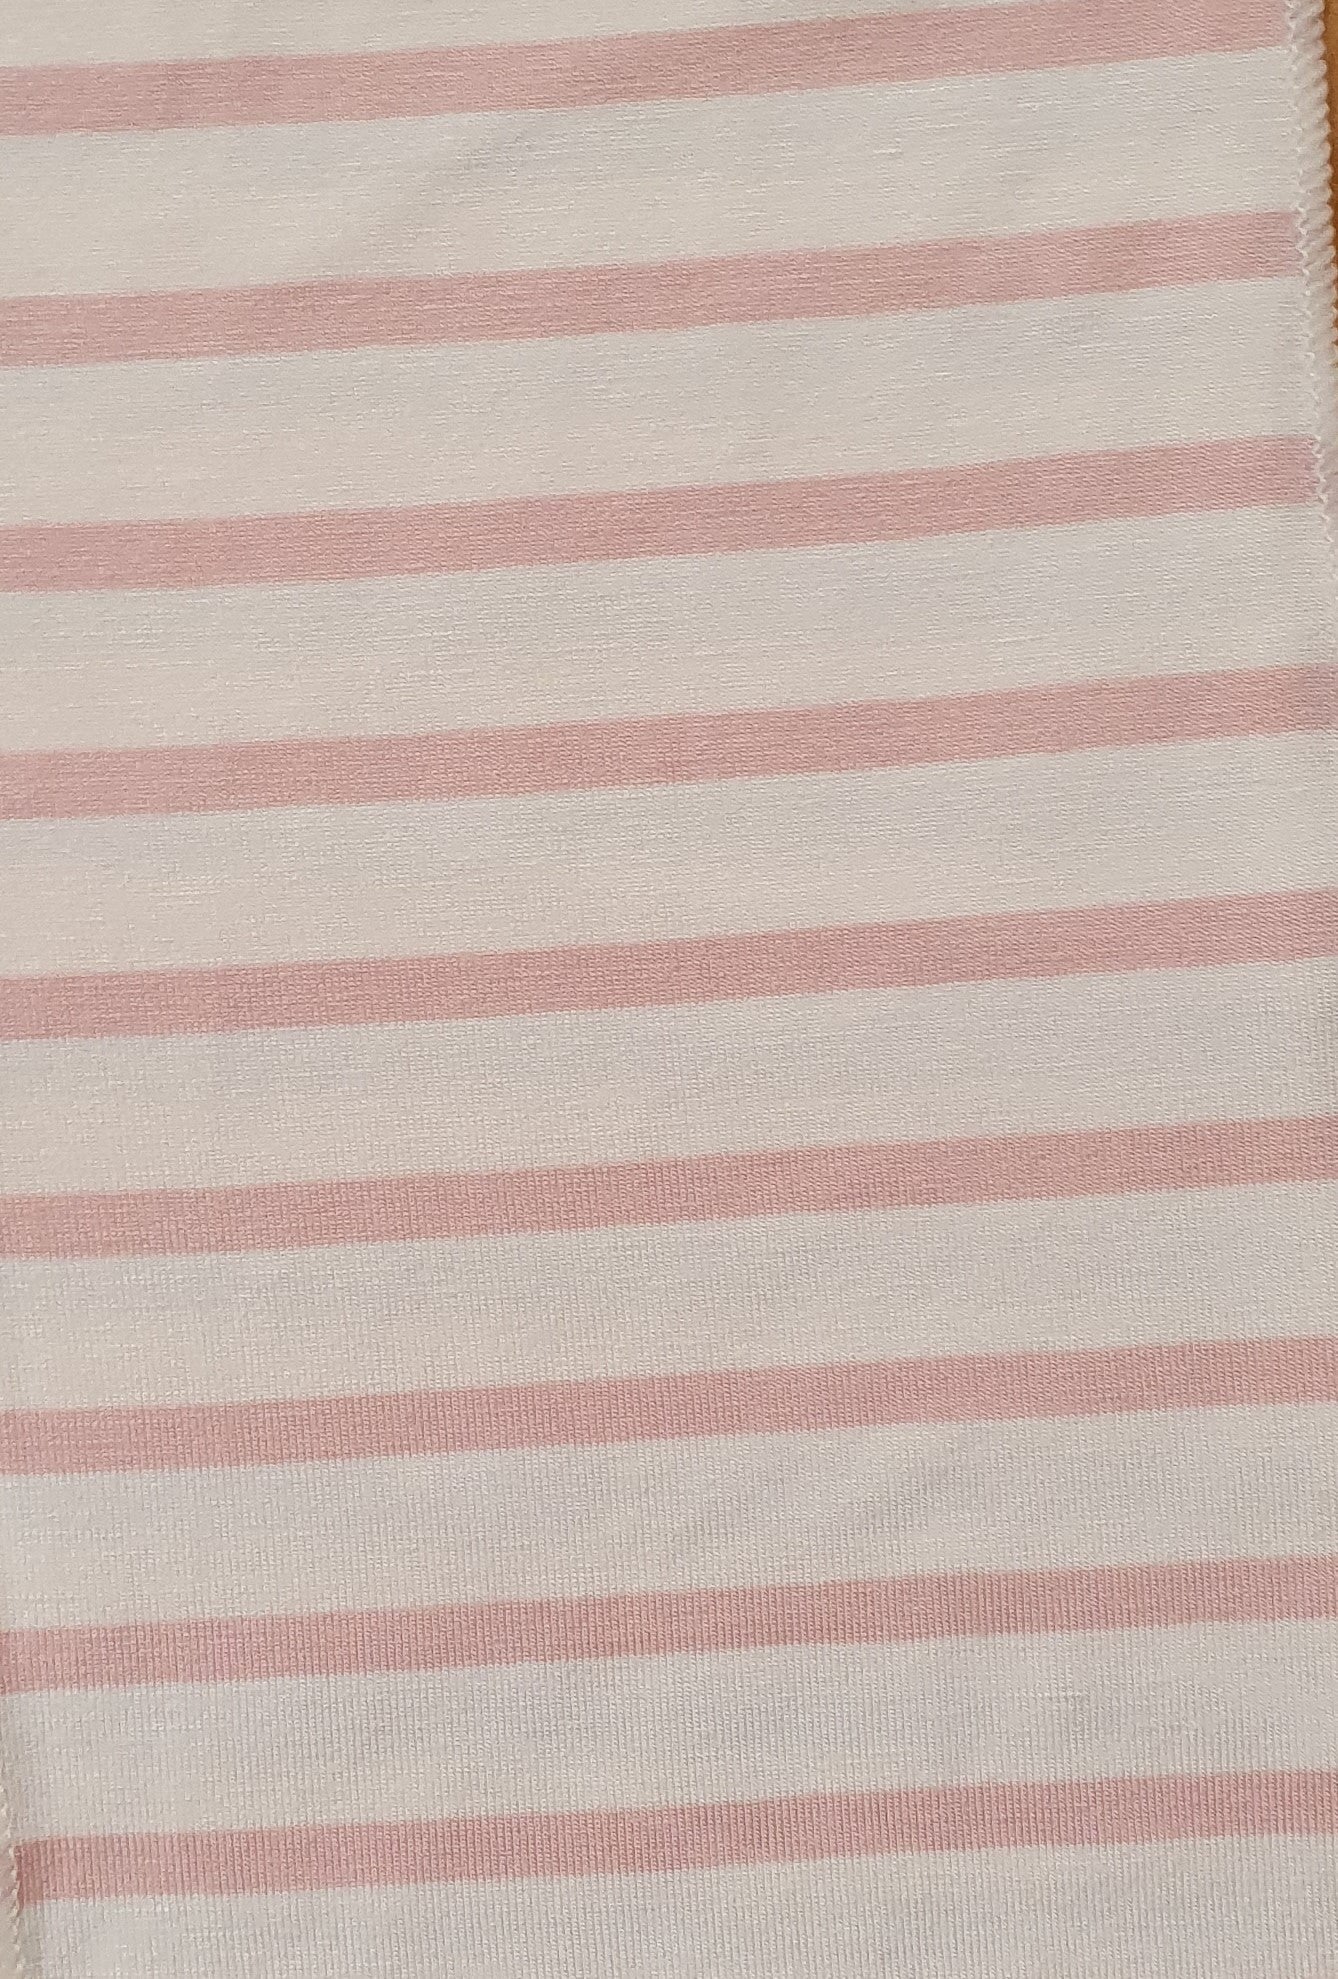 Tshirt Bamboo Baby General Boody 6-12 months Rose Stripe 